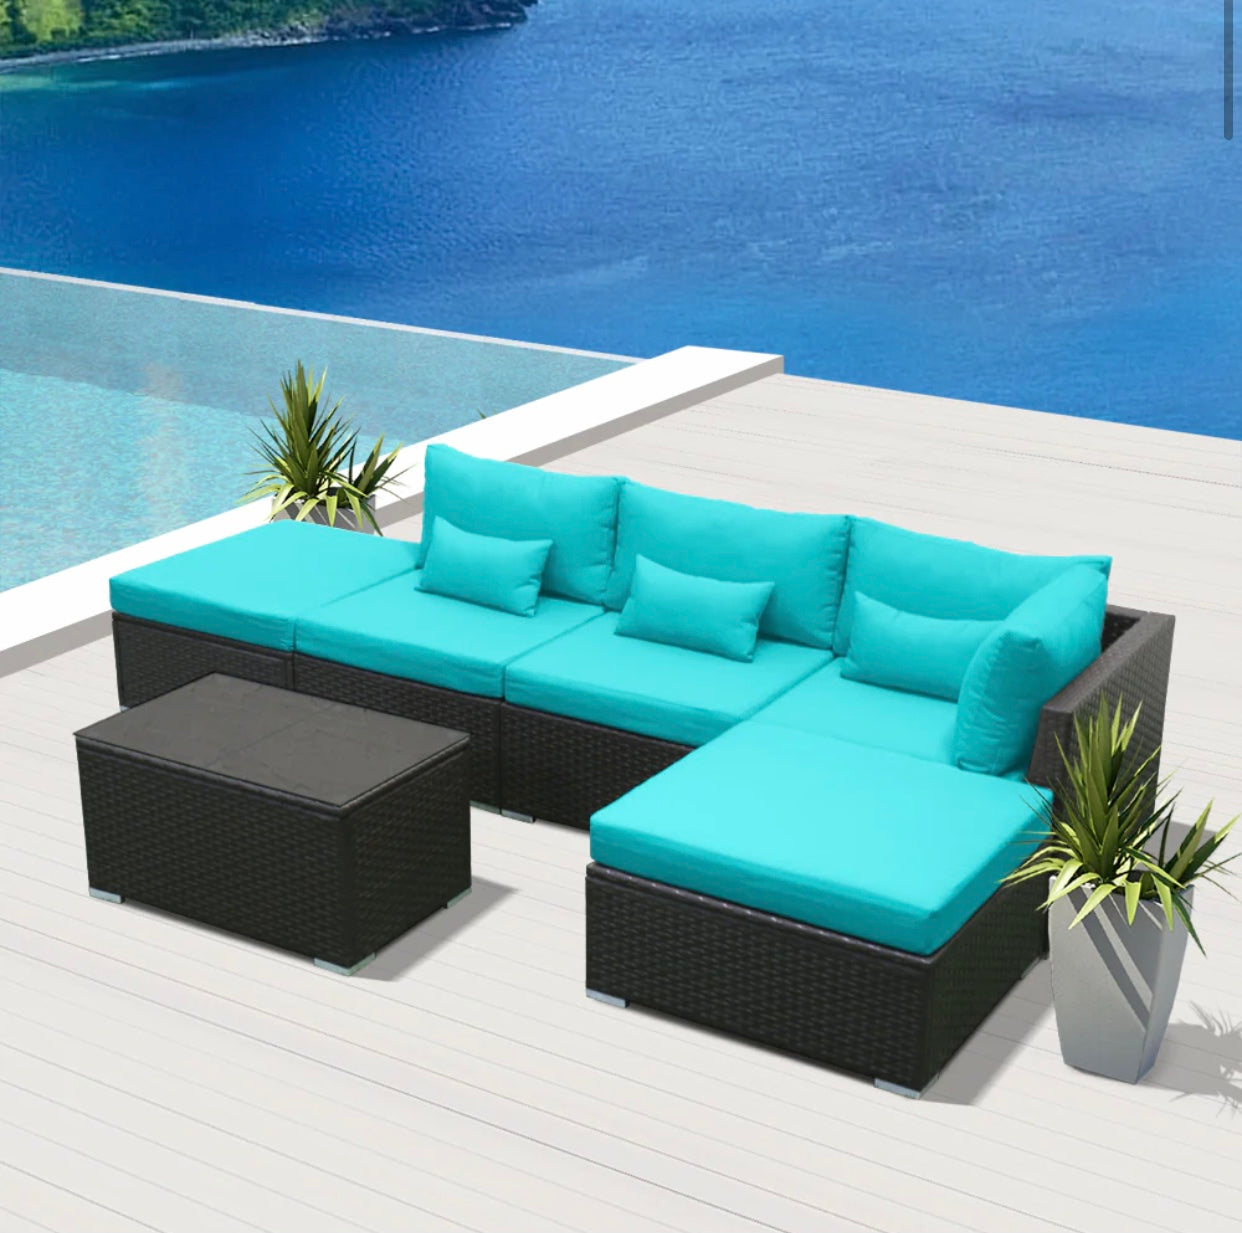 Blue Turquoise Rattan Outdoor Garden Furniture Sets in 6 Pieces Six